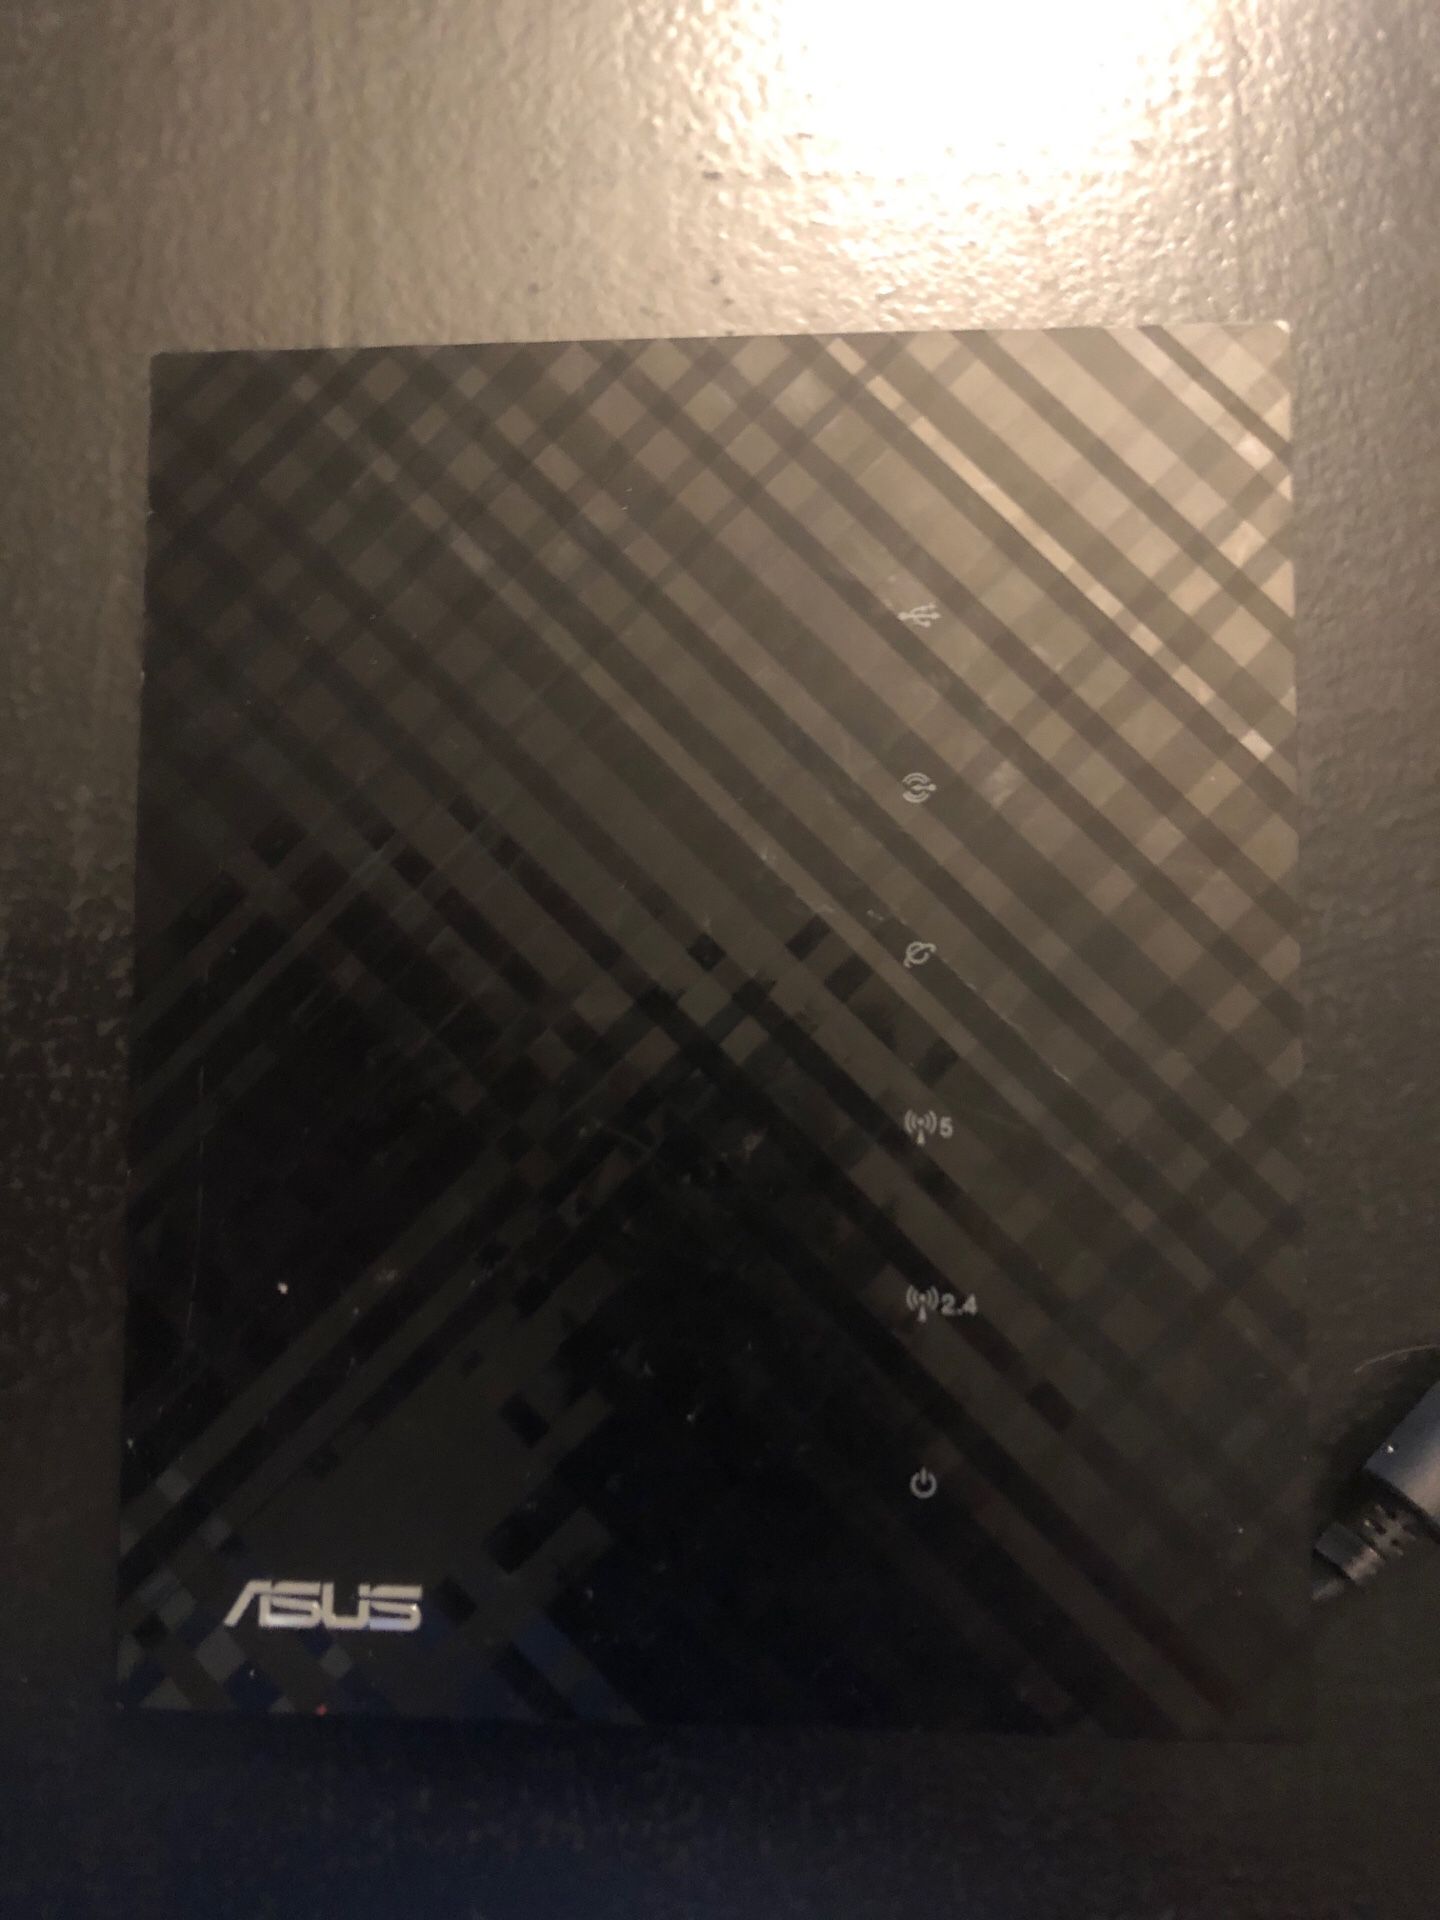 Asus router super fast. used just a month. Or less. $30. Obo